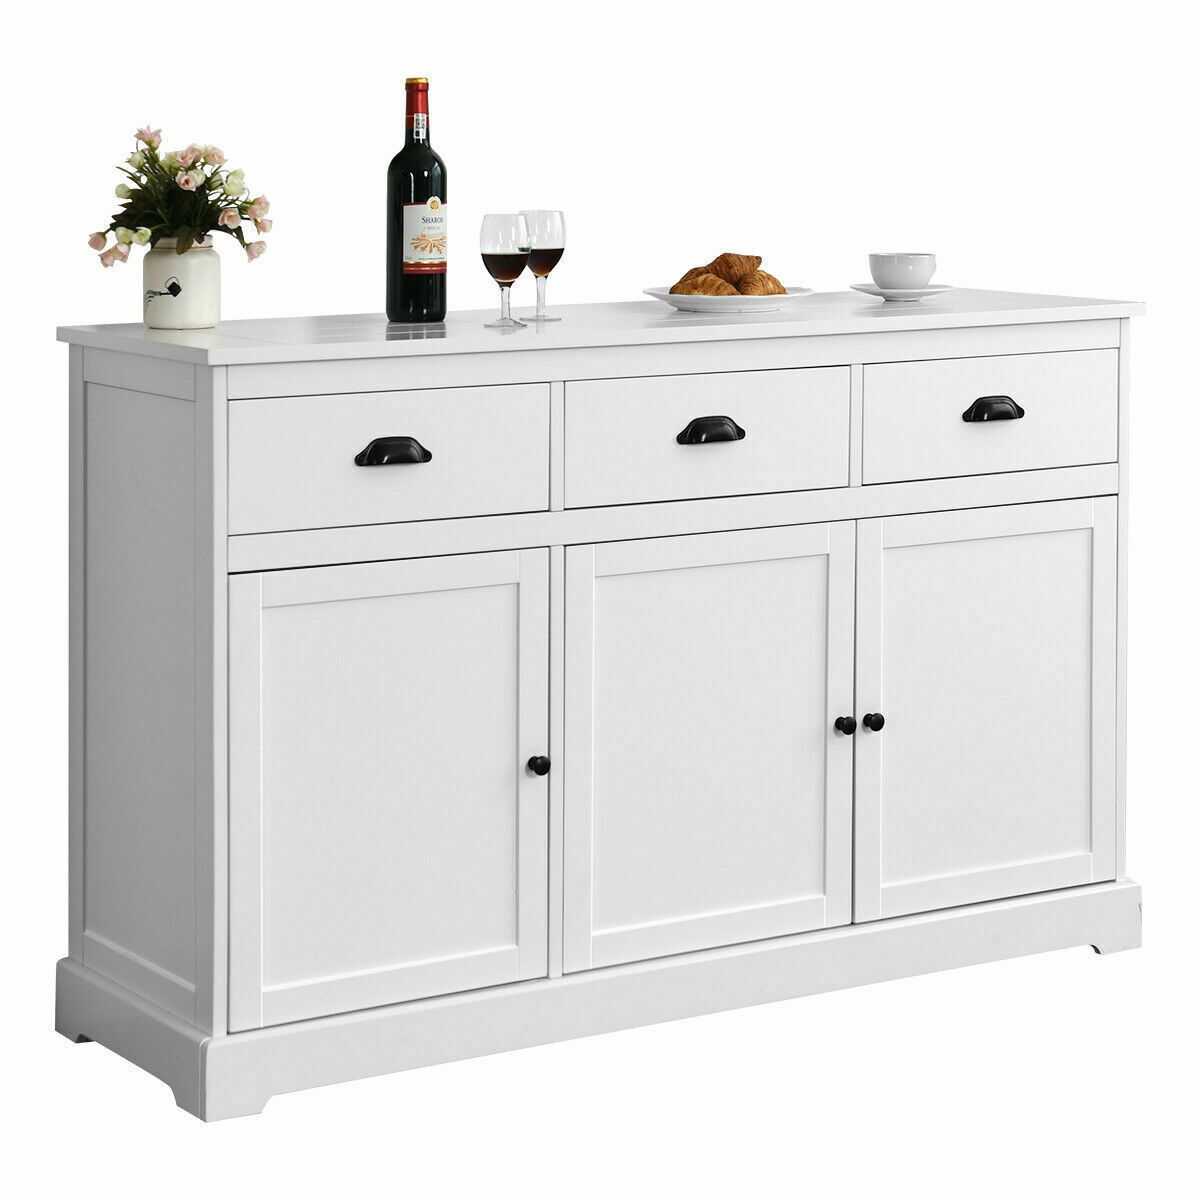 3 Drawers Sideboard Buffet Cabinet Console Table Kitchen Storage Cupboard  White Within 3 Shelf Corner Buffets (View 10 of 30)